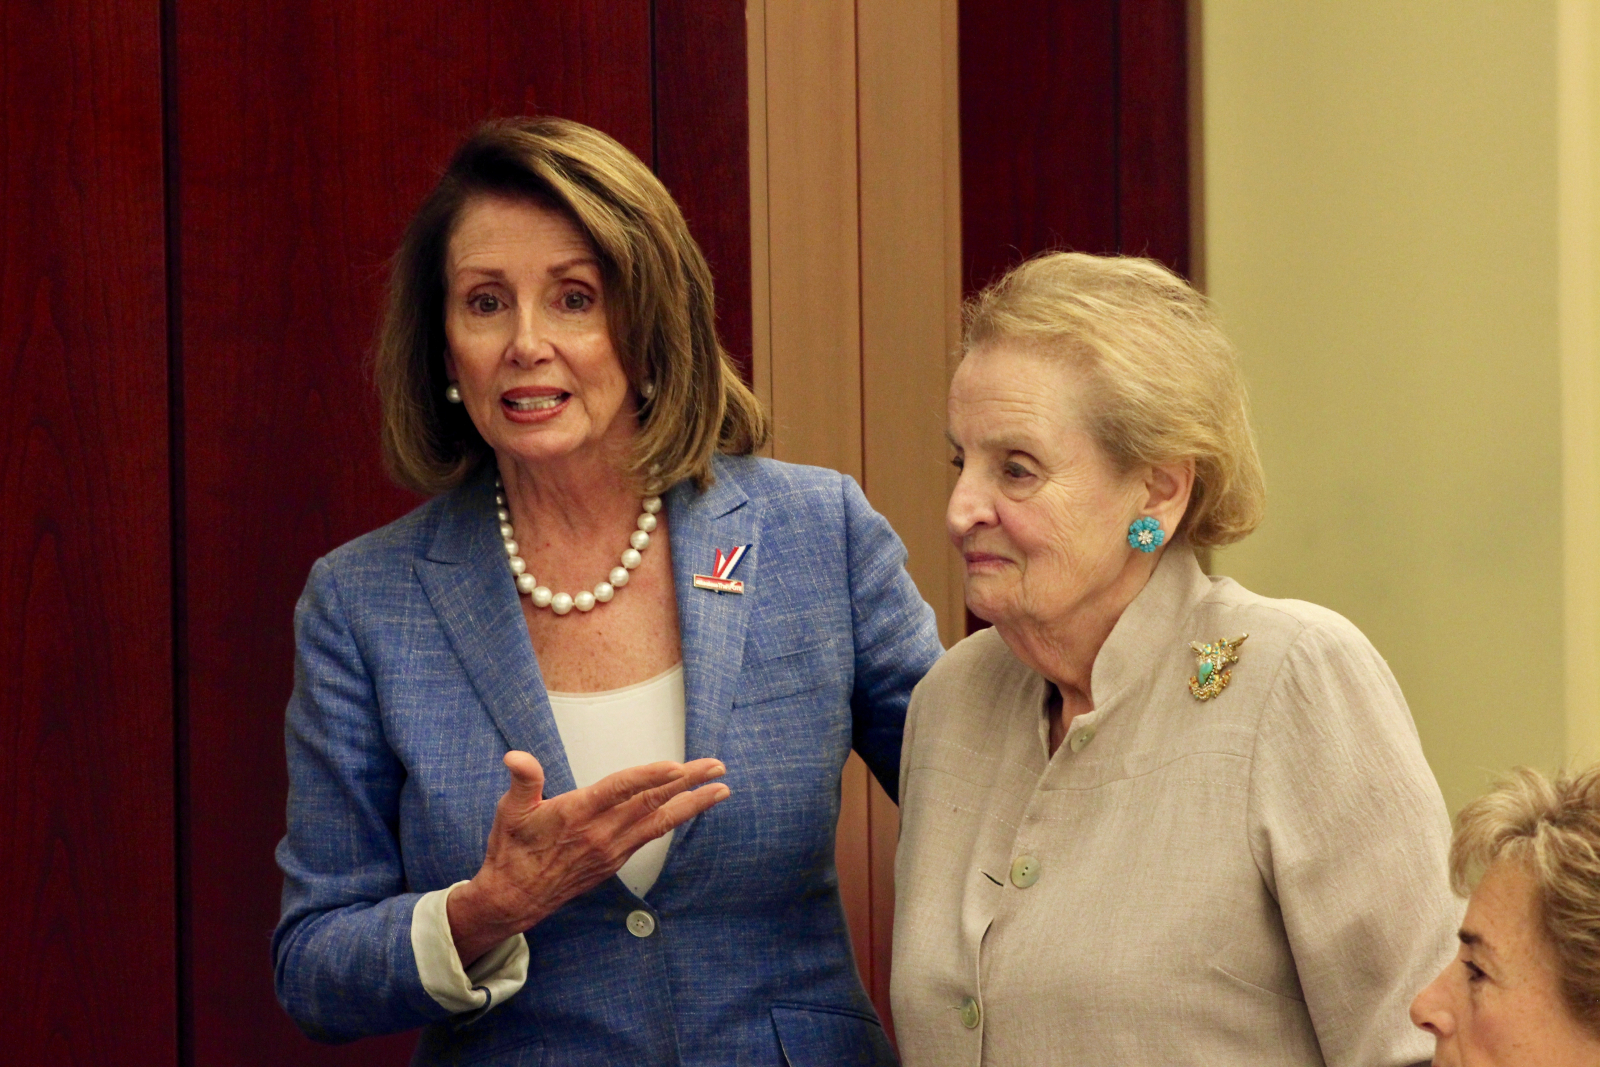 NDI Chairman Albright Meets with Congressional Leaders on Democracy in Syria and Countering Violence Against Women 